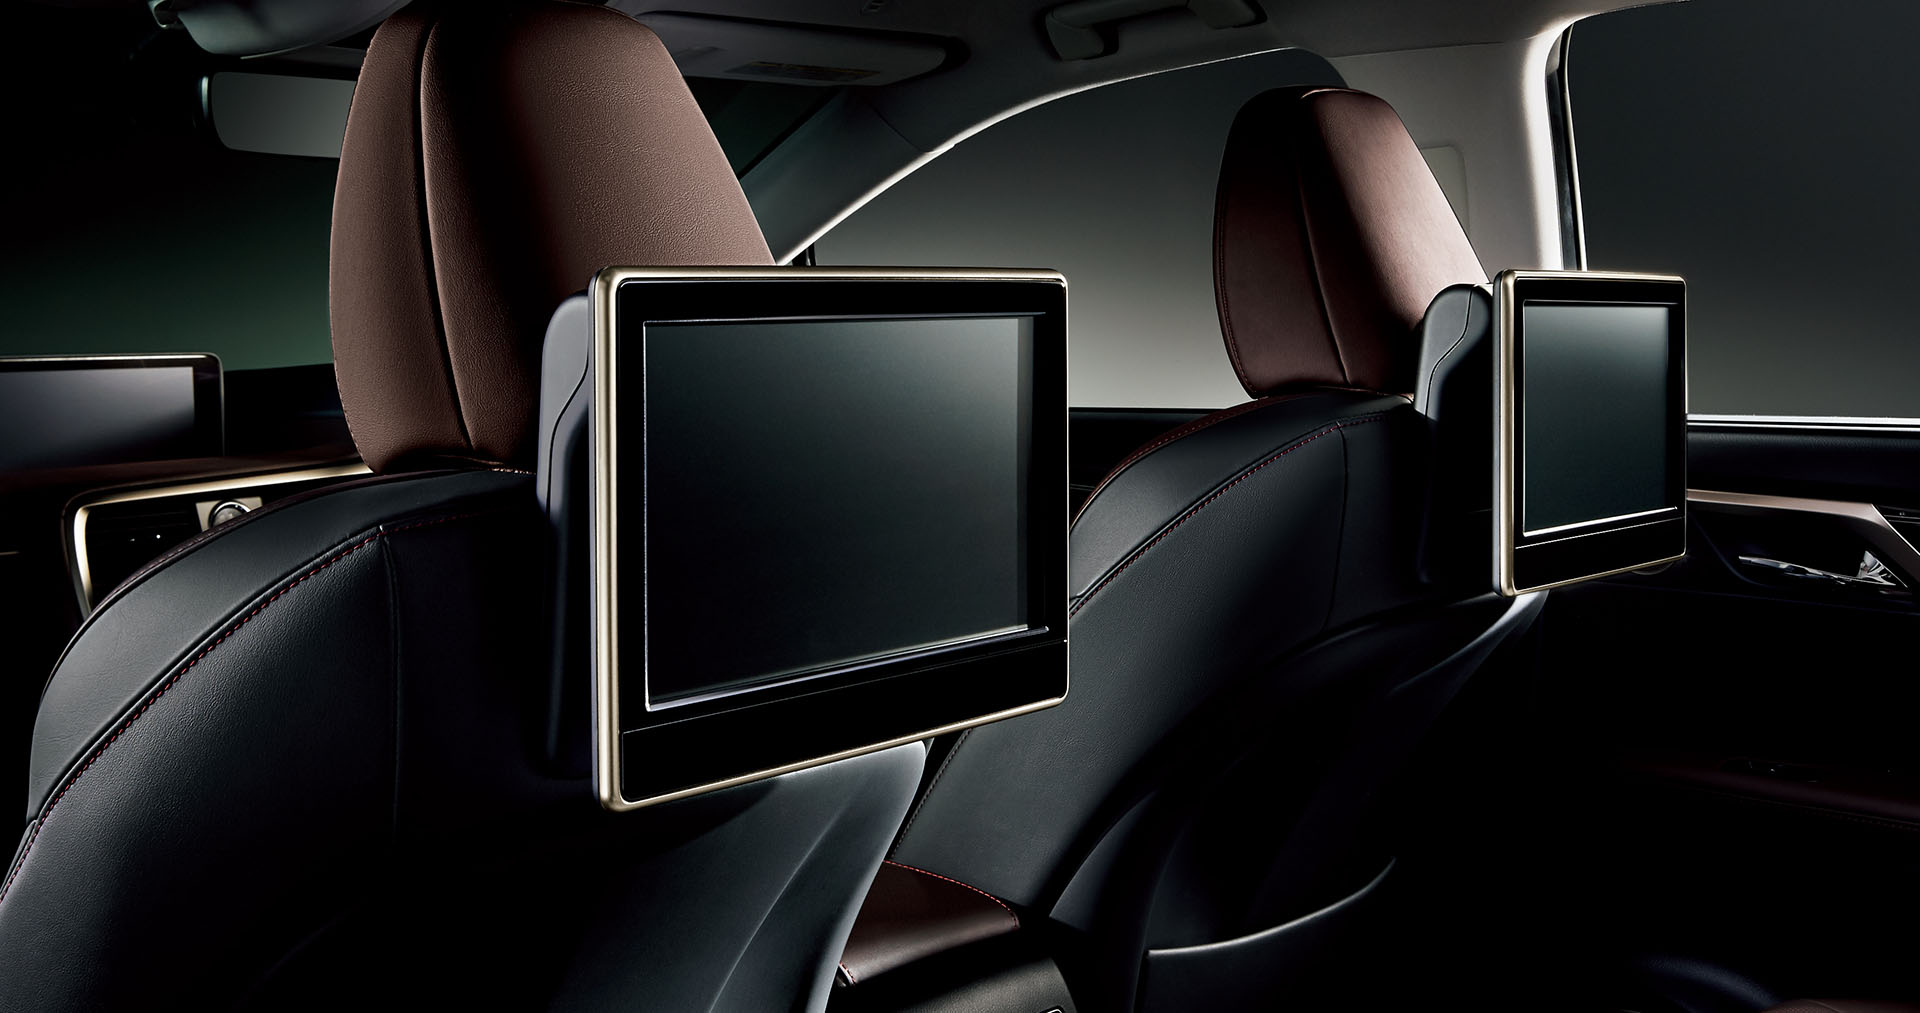 Rear Seat Entertainment System Toyota Motor Corporation Official Global Website